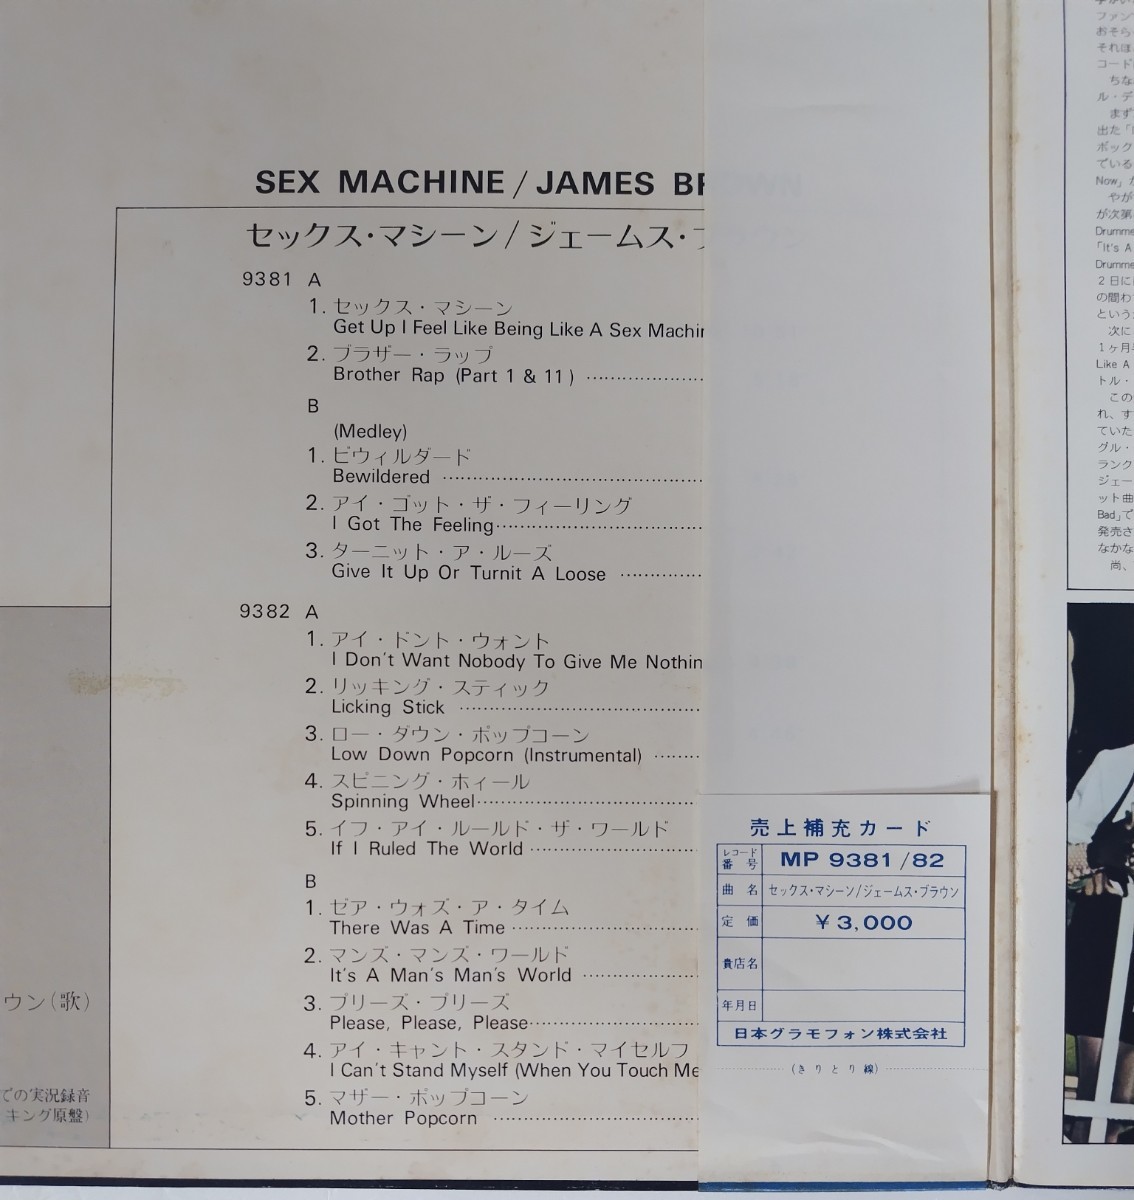 James Brown Sex Machine /ジェームス・ブラウン1970年Polydor MP 9381/82補充票帯付き２枚組国内盤/盤面ミント_画像4